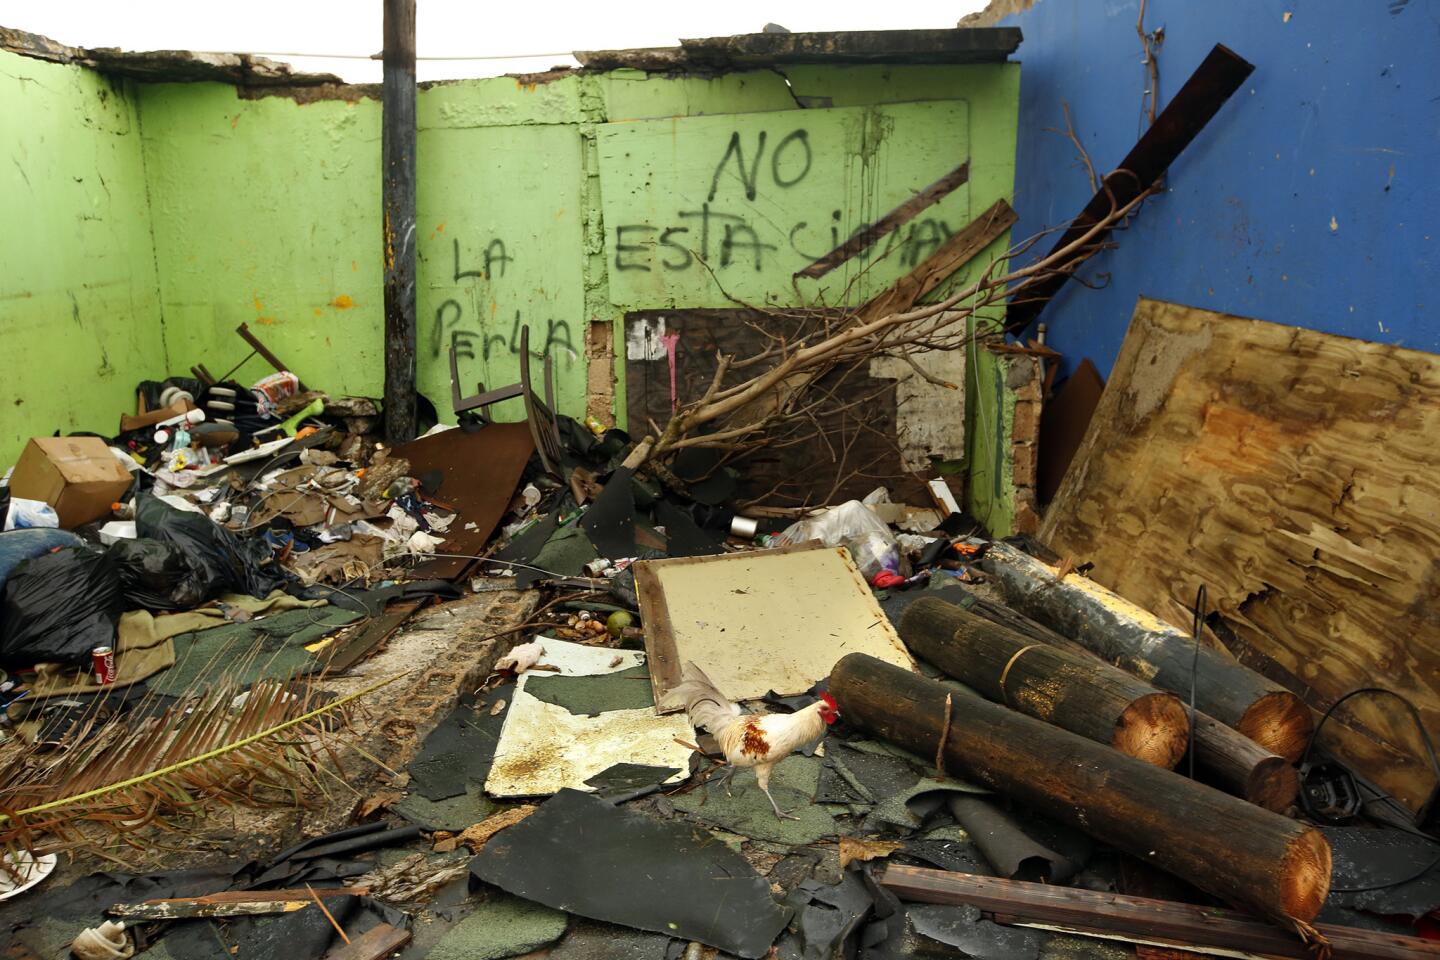 Chickens run loose in the area of La Perla, where many homes were destroyed.